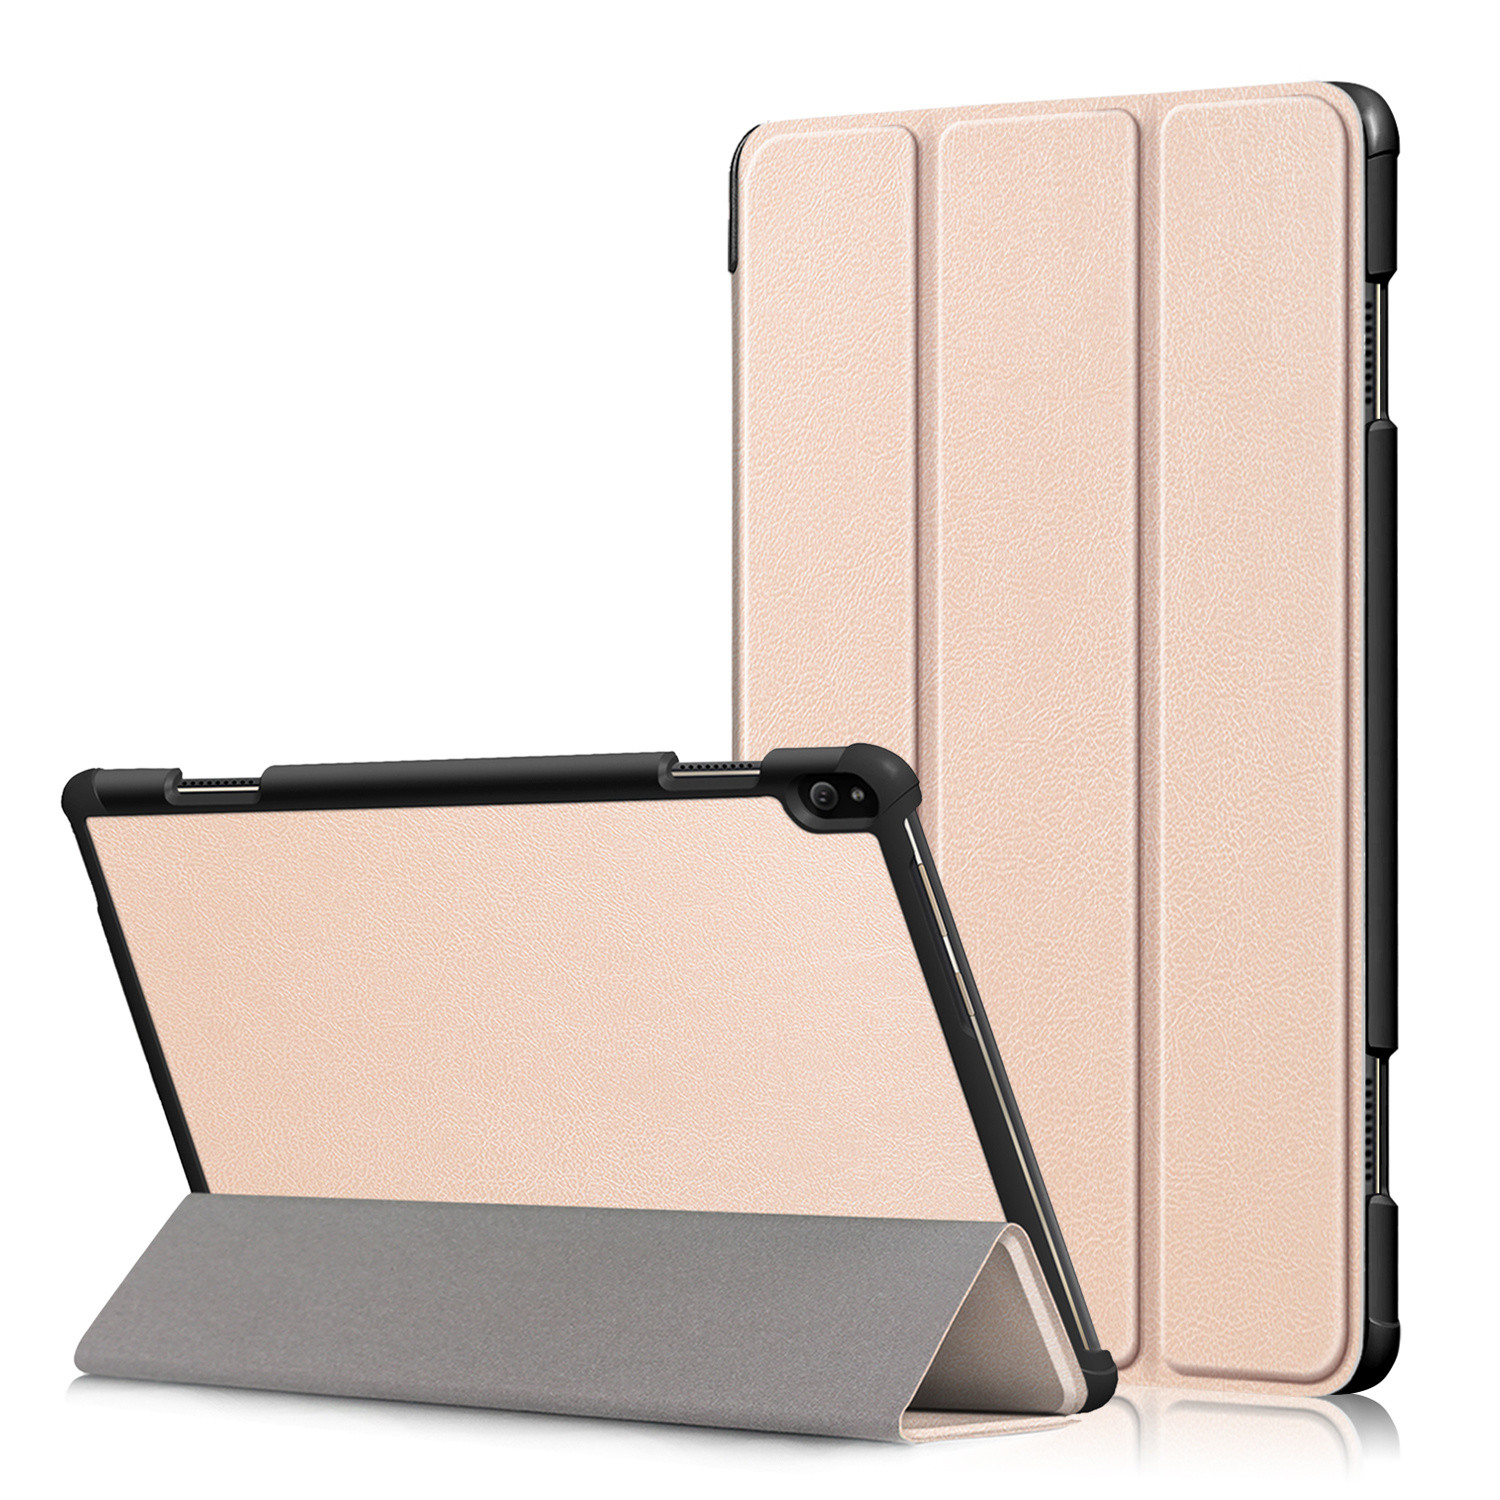 3-Vouw sleepcover hoes - Lenovo Tab P10 - Goud